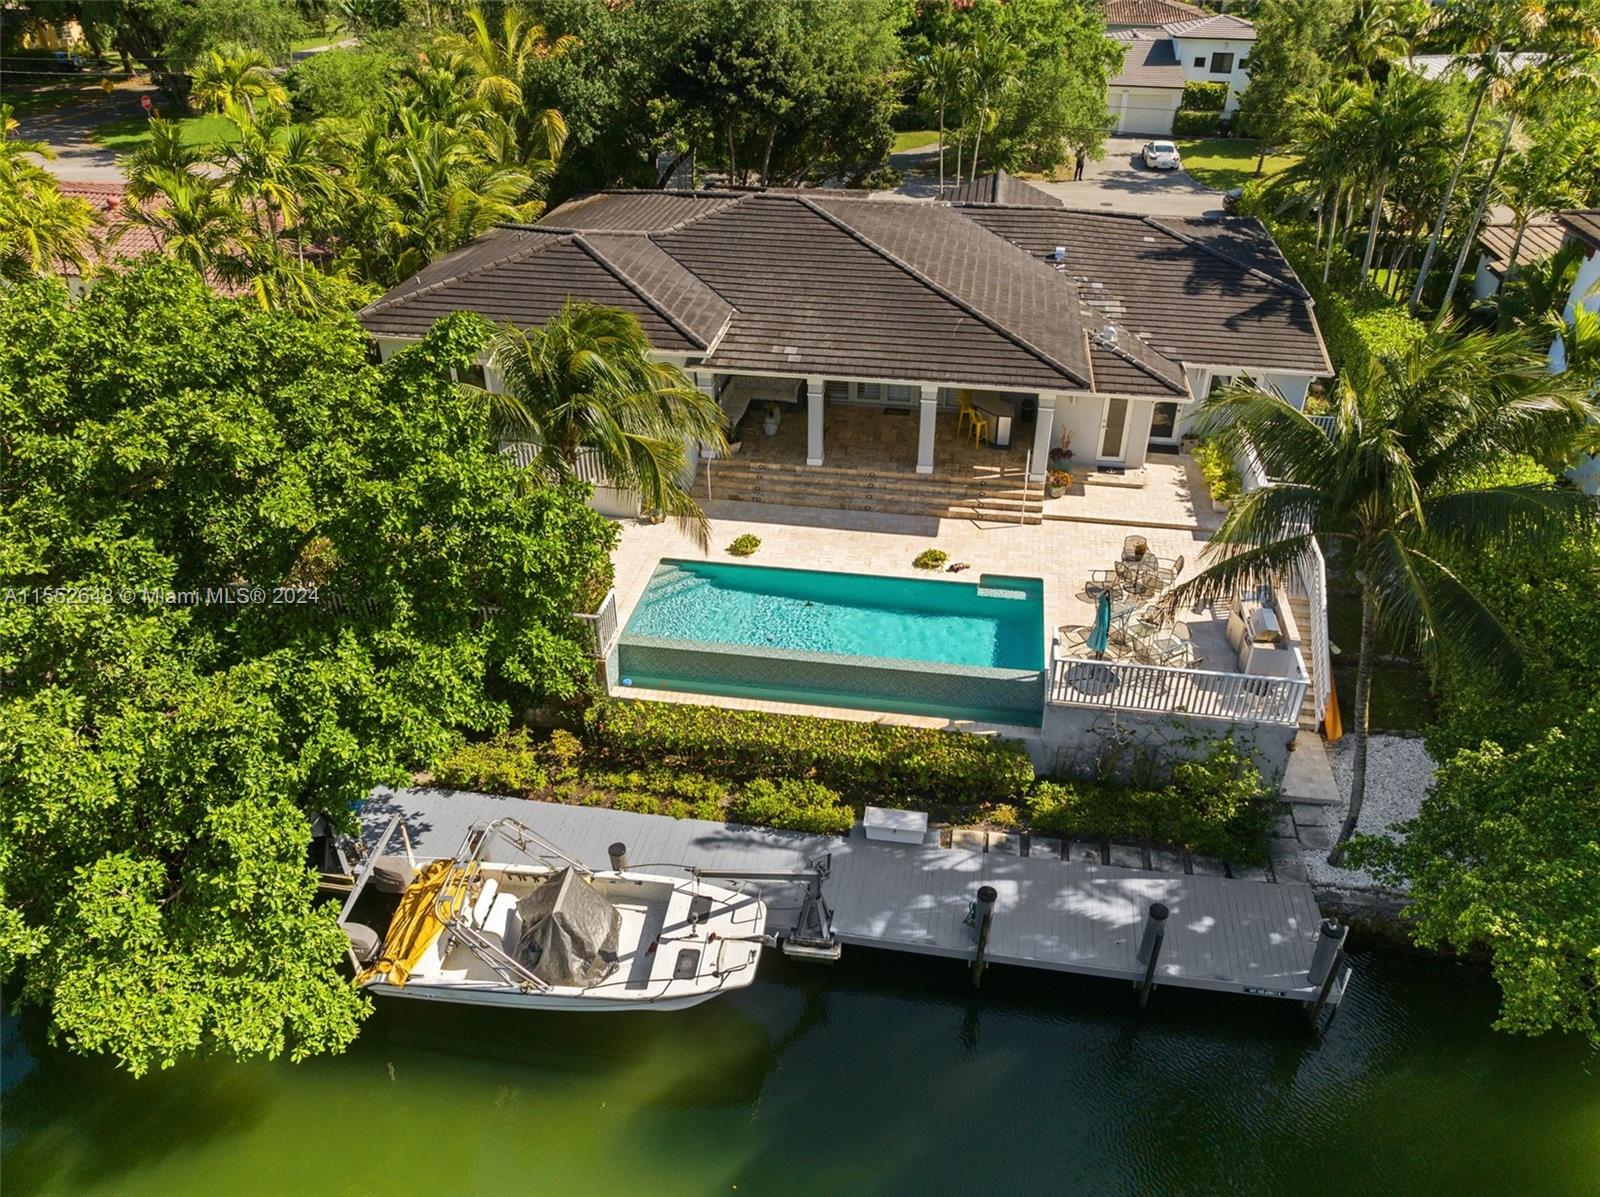 This exquisite 4-bedroom, 4.5-bathroom waterfront residence offers an unparalleled living experience, with direct access to the highly sought-after Coral Gables Waterway. It provides a 70-foot dock and a boat lift, perfect for boaters and water sport enthusiasts. The home has been meticulously updated, featuring an open-space layout designed to enhance the flow of natural light and views of the outdoors, including an infinity pool that seamlessly blends with the serene waterway. The well-appointed primary room showcases
oversized walking closets, a spa-like bathroom with dual sinks, and separate tub and showers. Its central location is near schools, businesses, entertainment and shopping districts, the airport, hospitals, and the Biltmore and Riviera Country Club golf courses